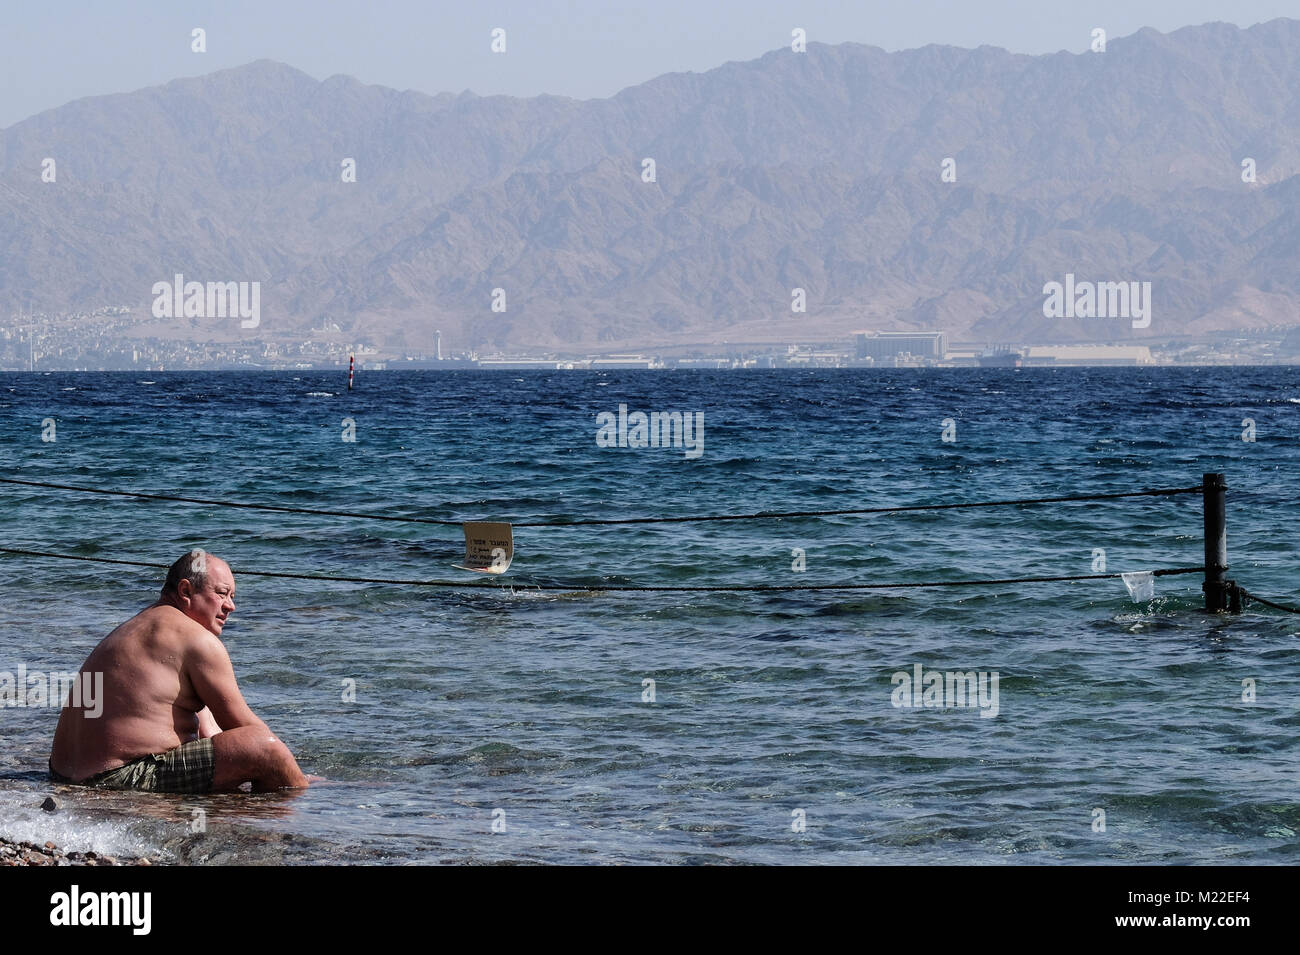 Israel's southernmost city, Eilat, is situated in the Southern Negev Desert at the northern tip of the Red Sea, on the Gulf of Aqaba. The city's beach Stock Photo